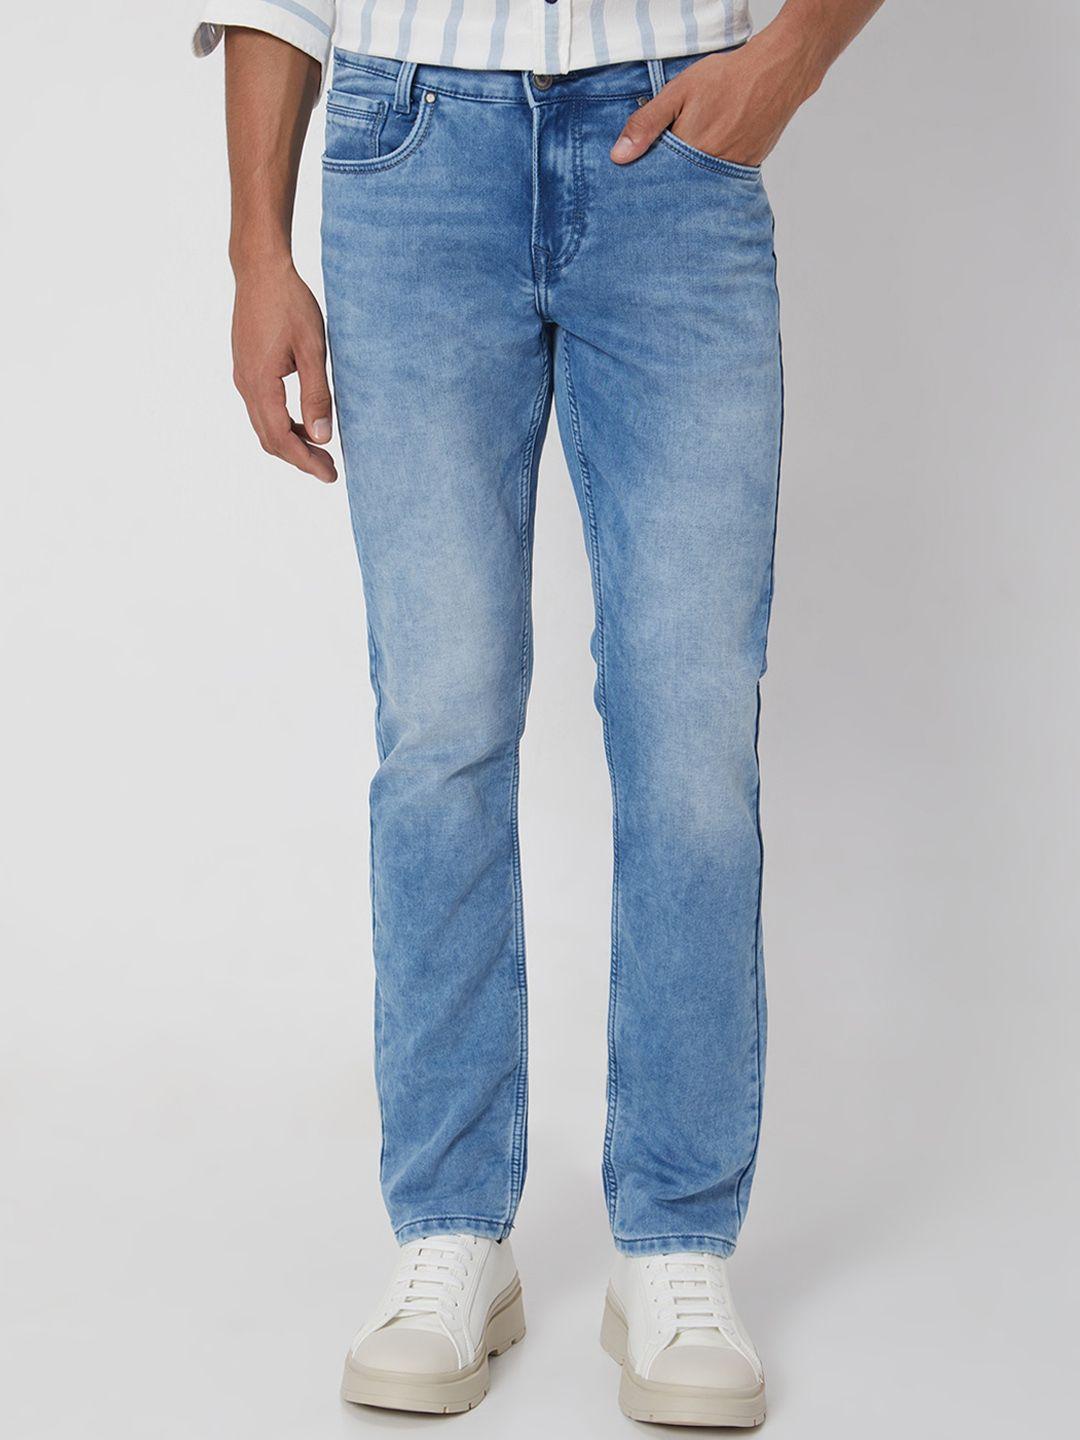 mufti-men-slim-fit-mid-rise-clean-look-heavy-fade-stretchable-jeans